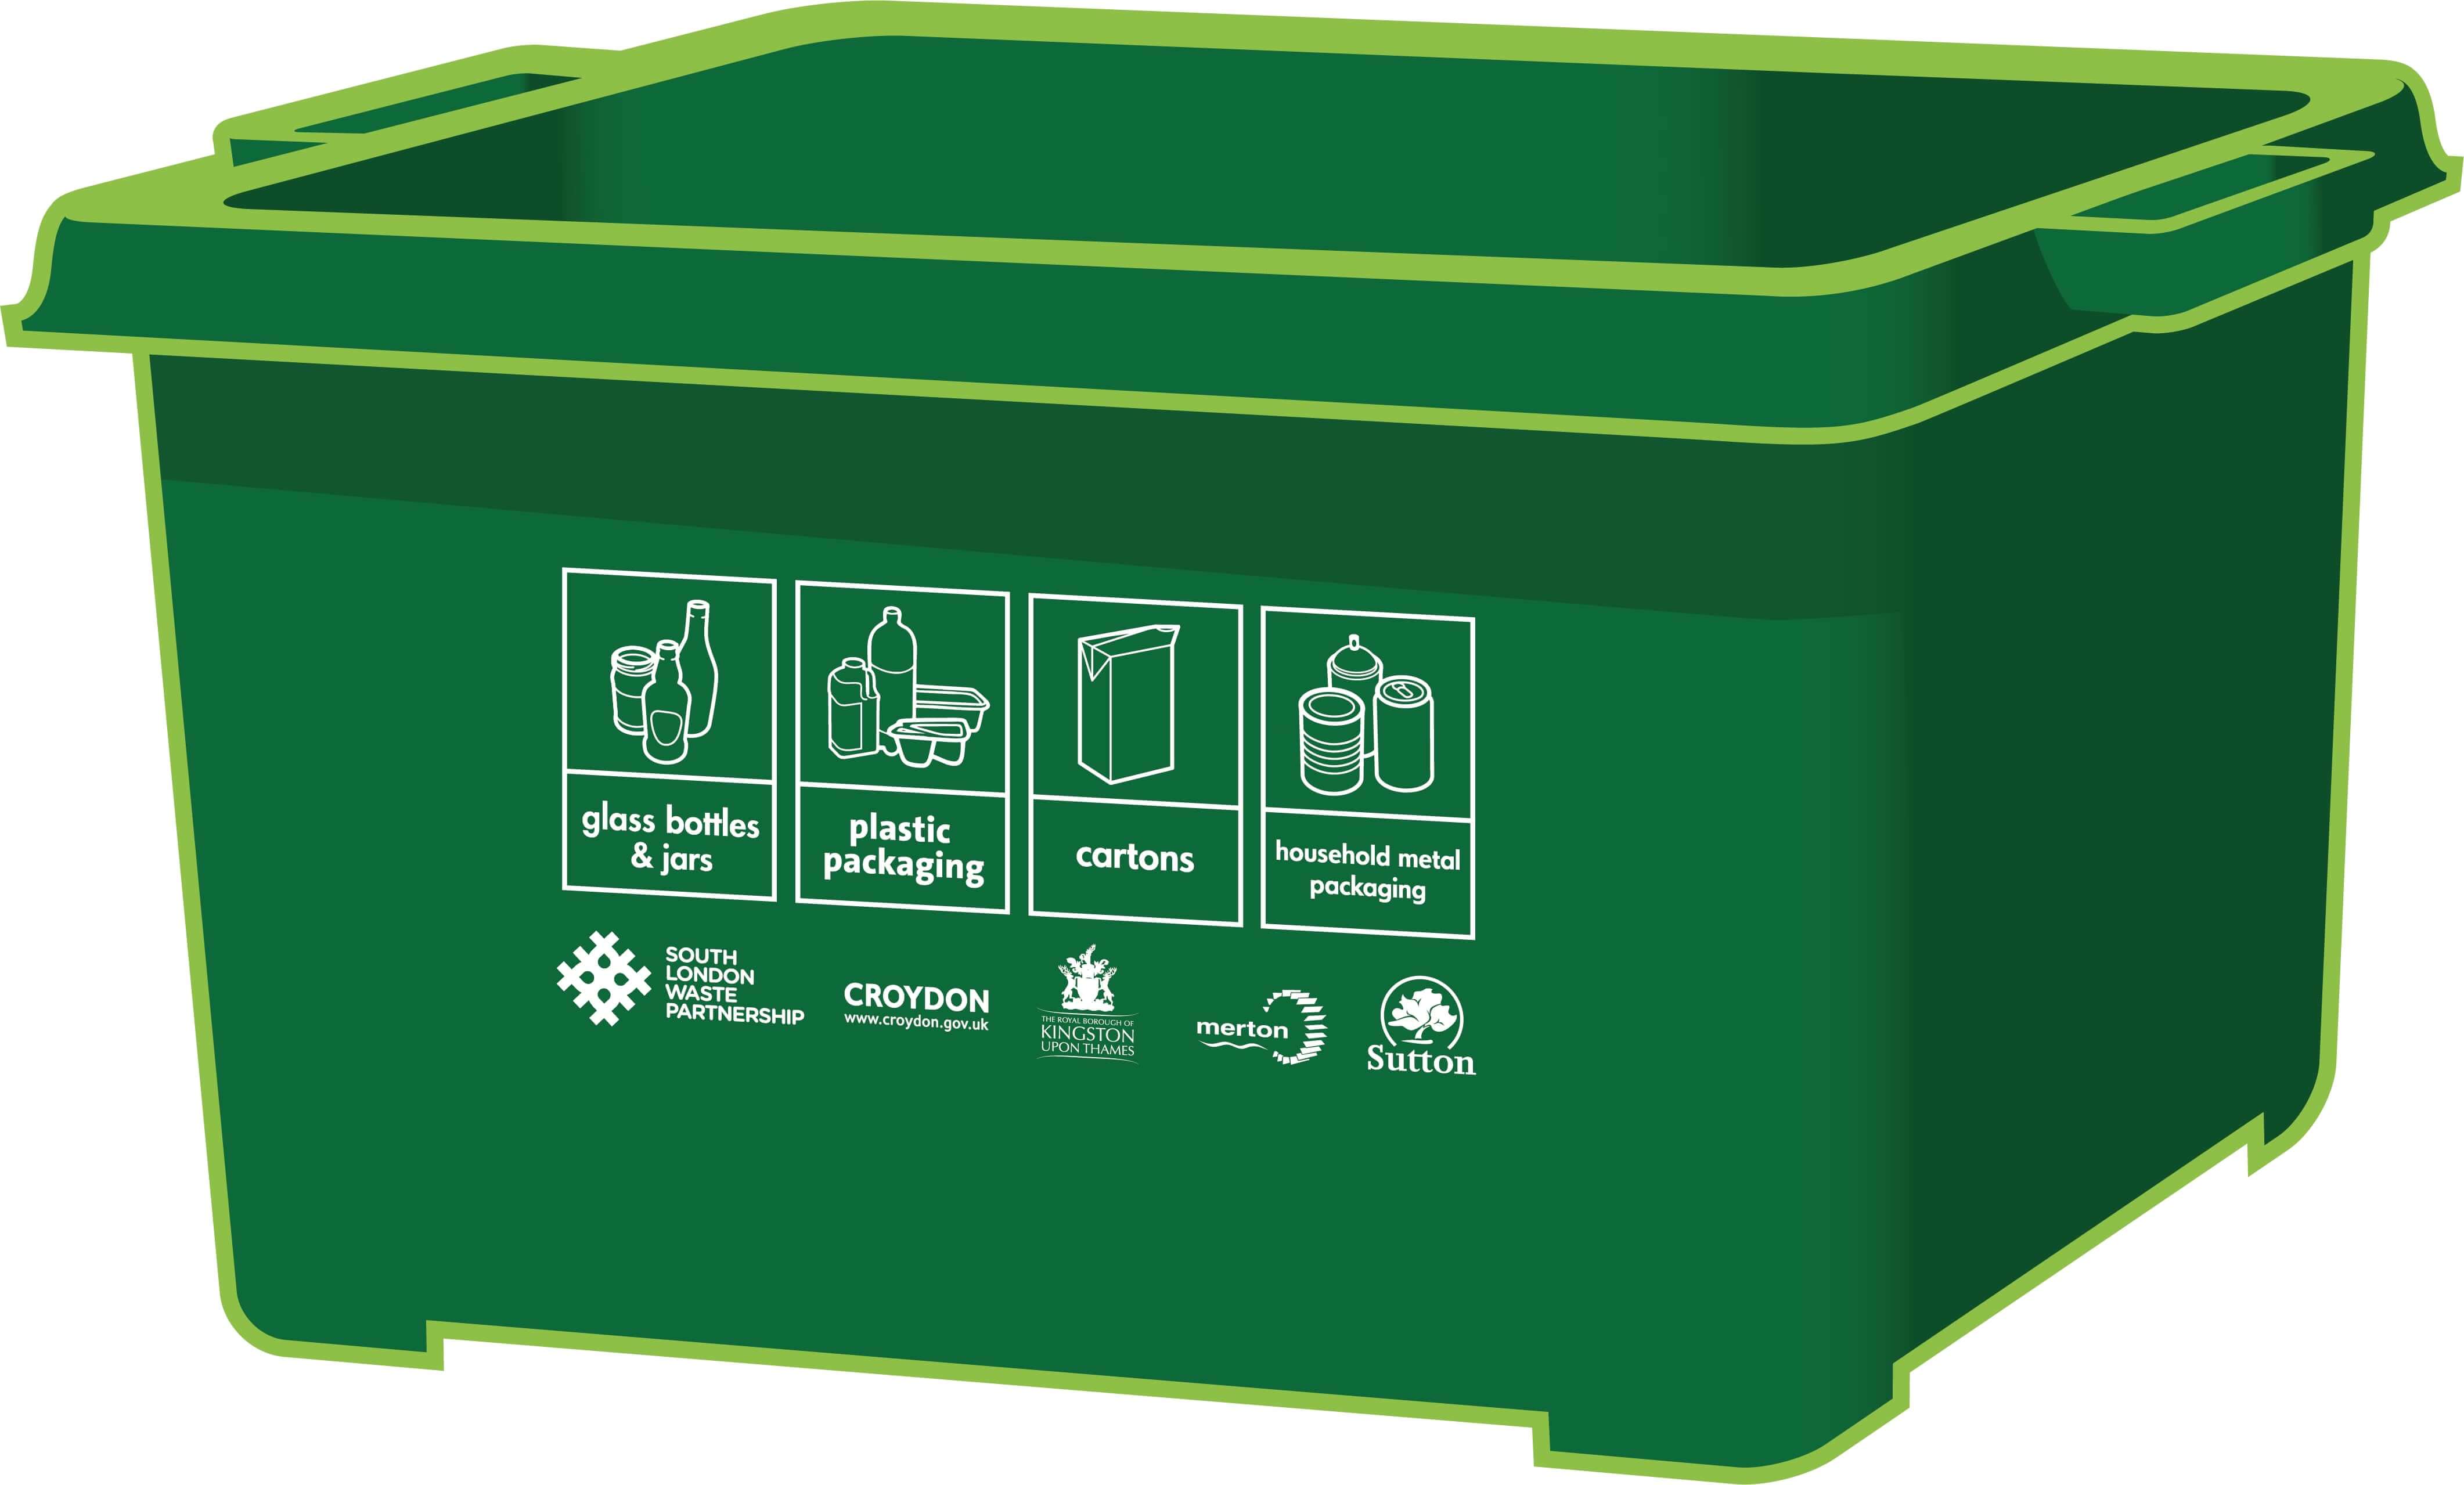 Green recycling plastic box with South London Waste Partnership logos on it.